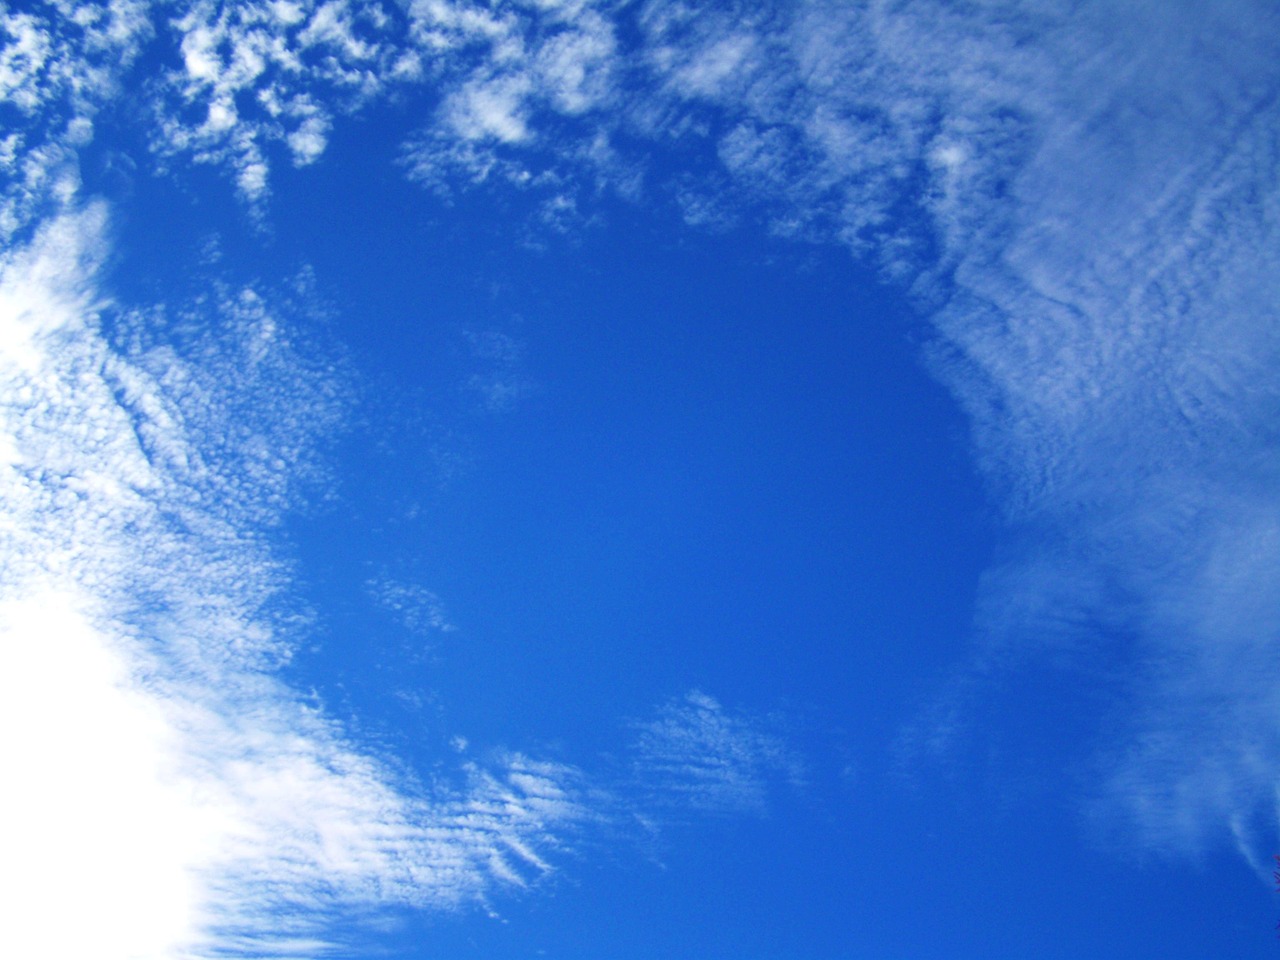 blue sky veil of clouds nature free photo